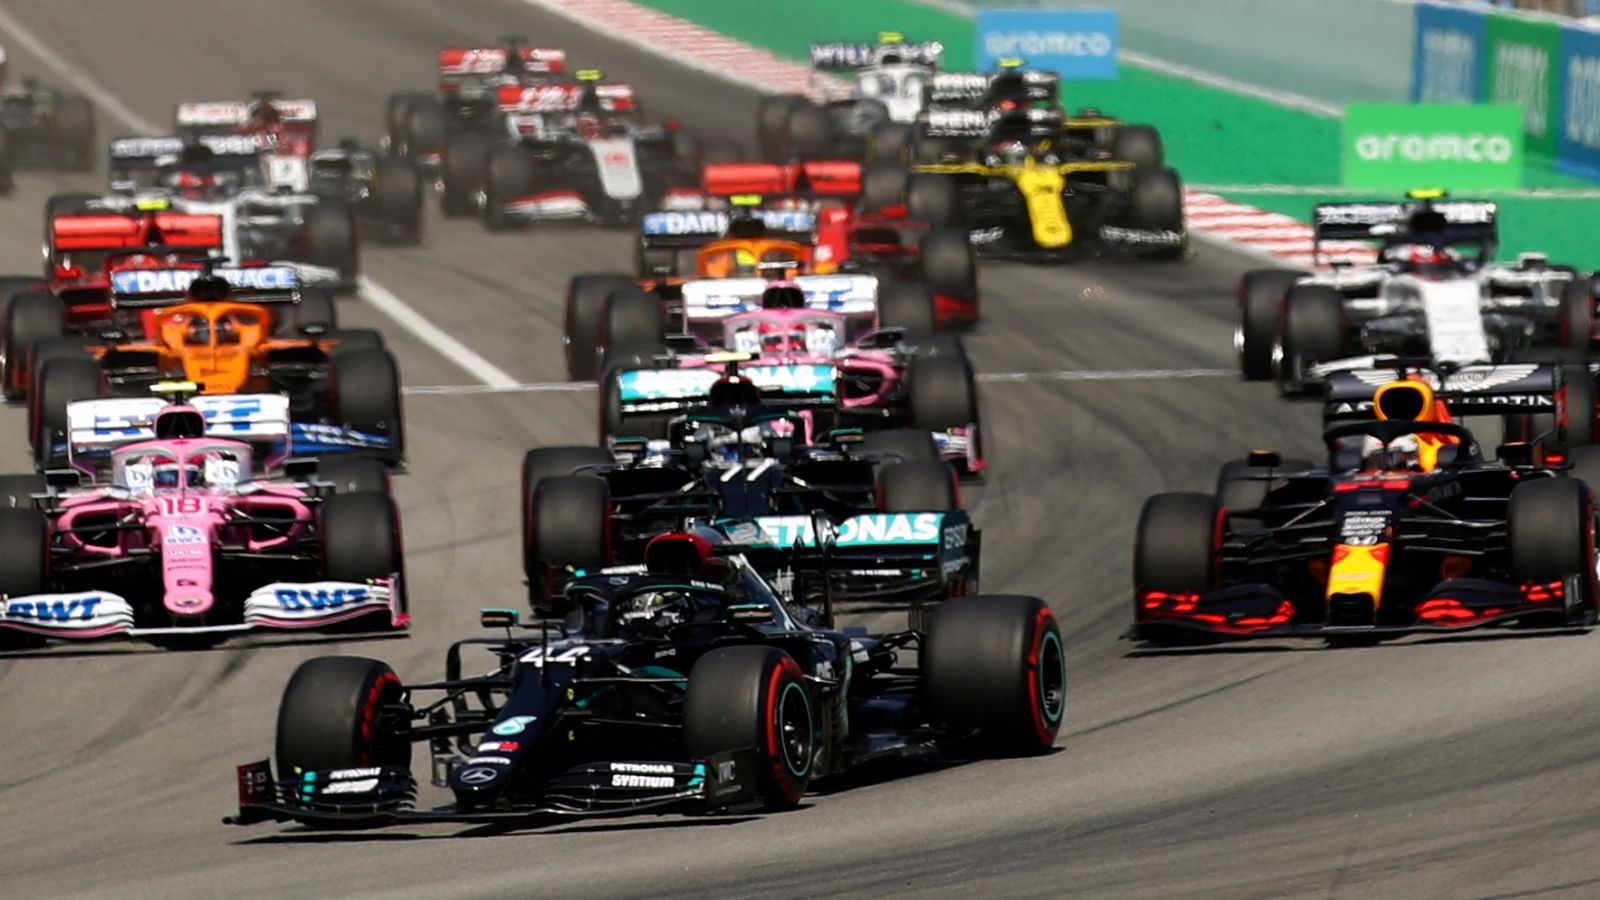 Formule 1 Agenda 2021 Formula 1 S New Plan For Three Saturday Sprint Races In Place Of Qualifying In 2021 Set For Vote F1 News